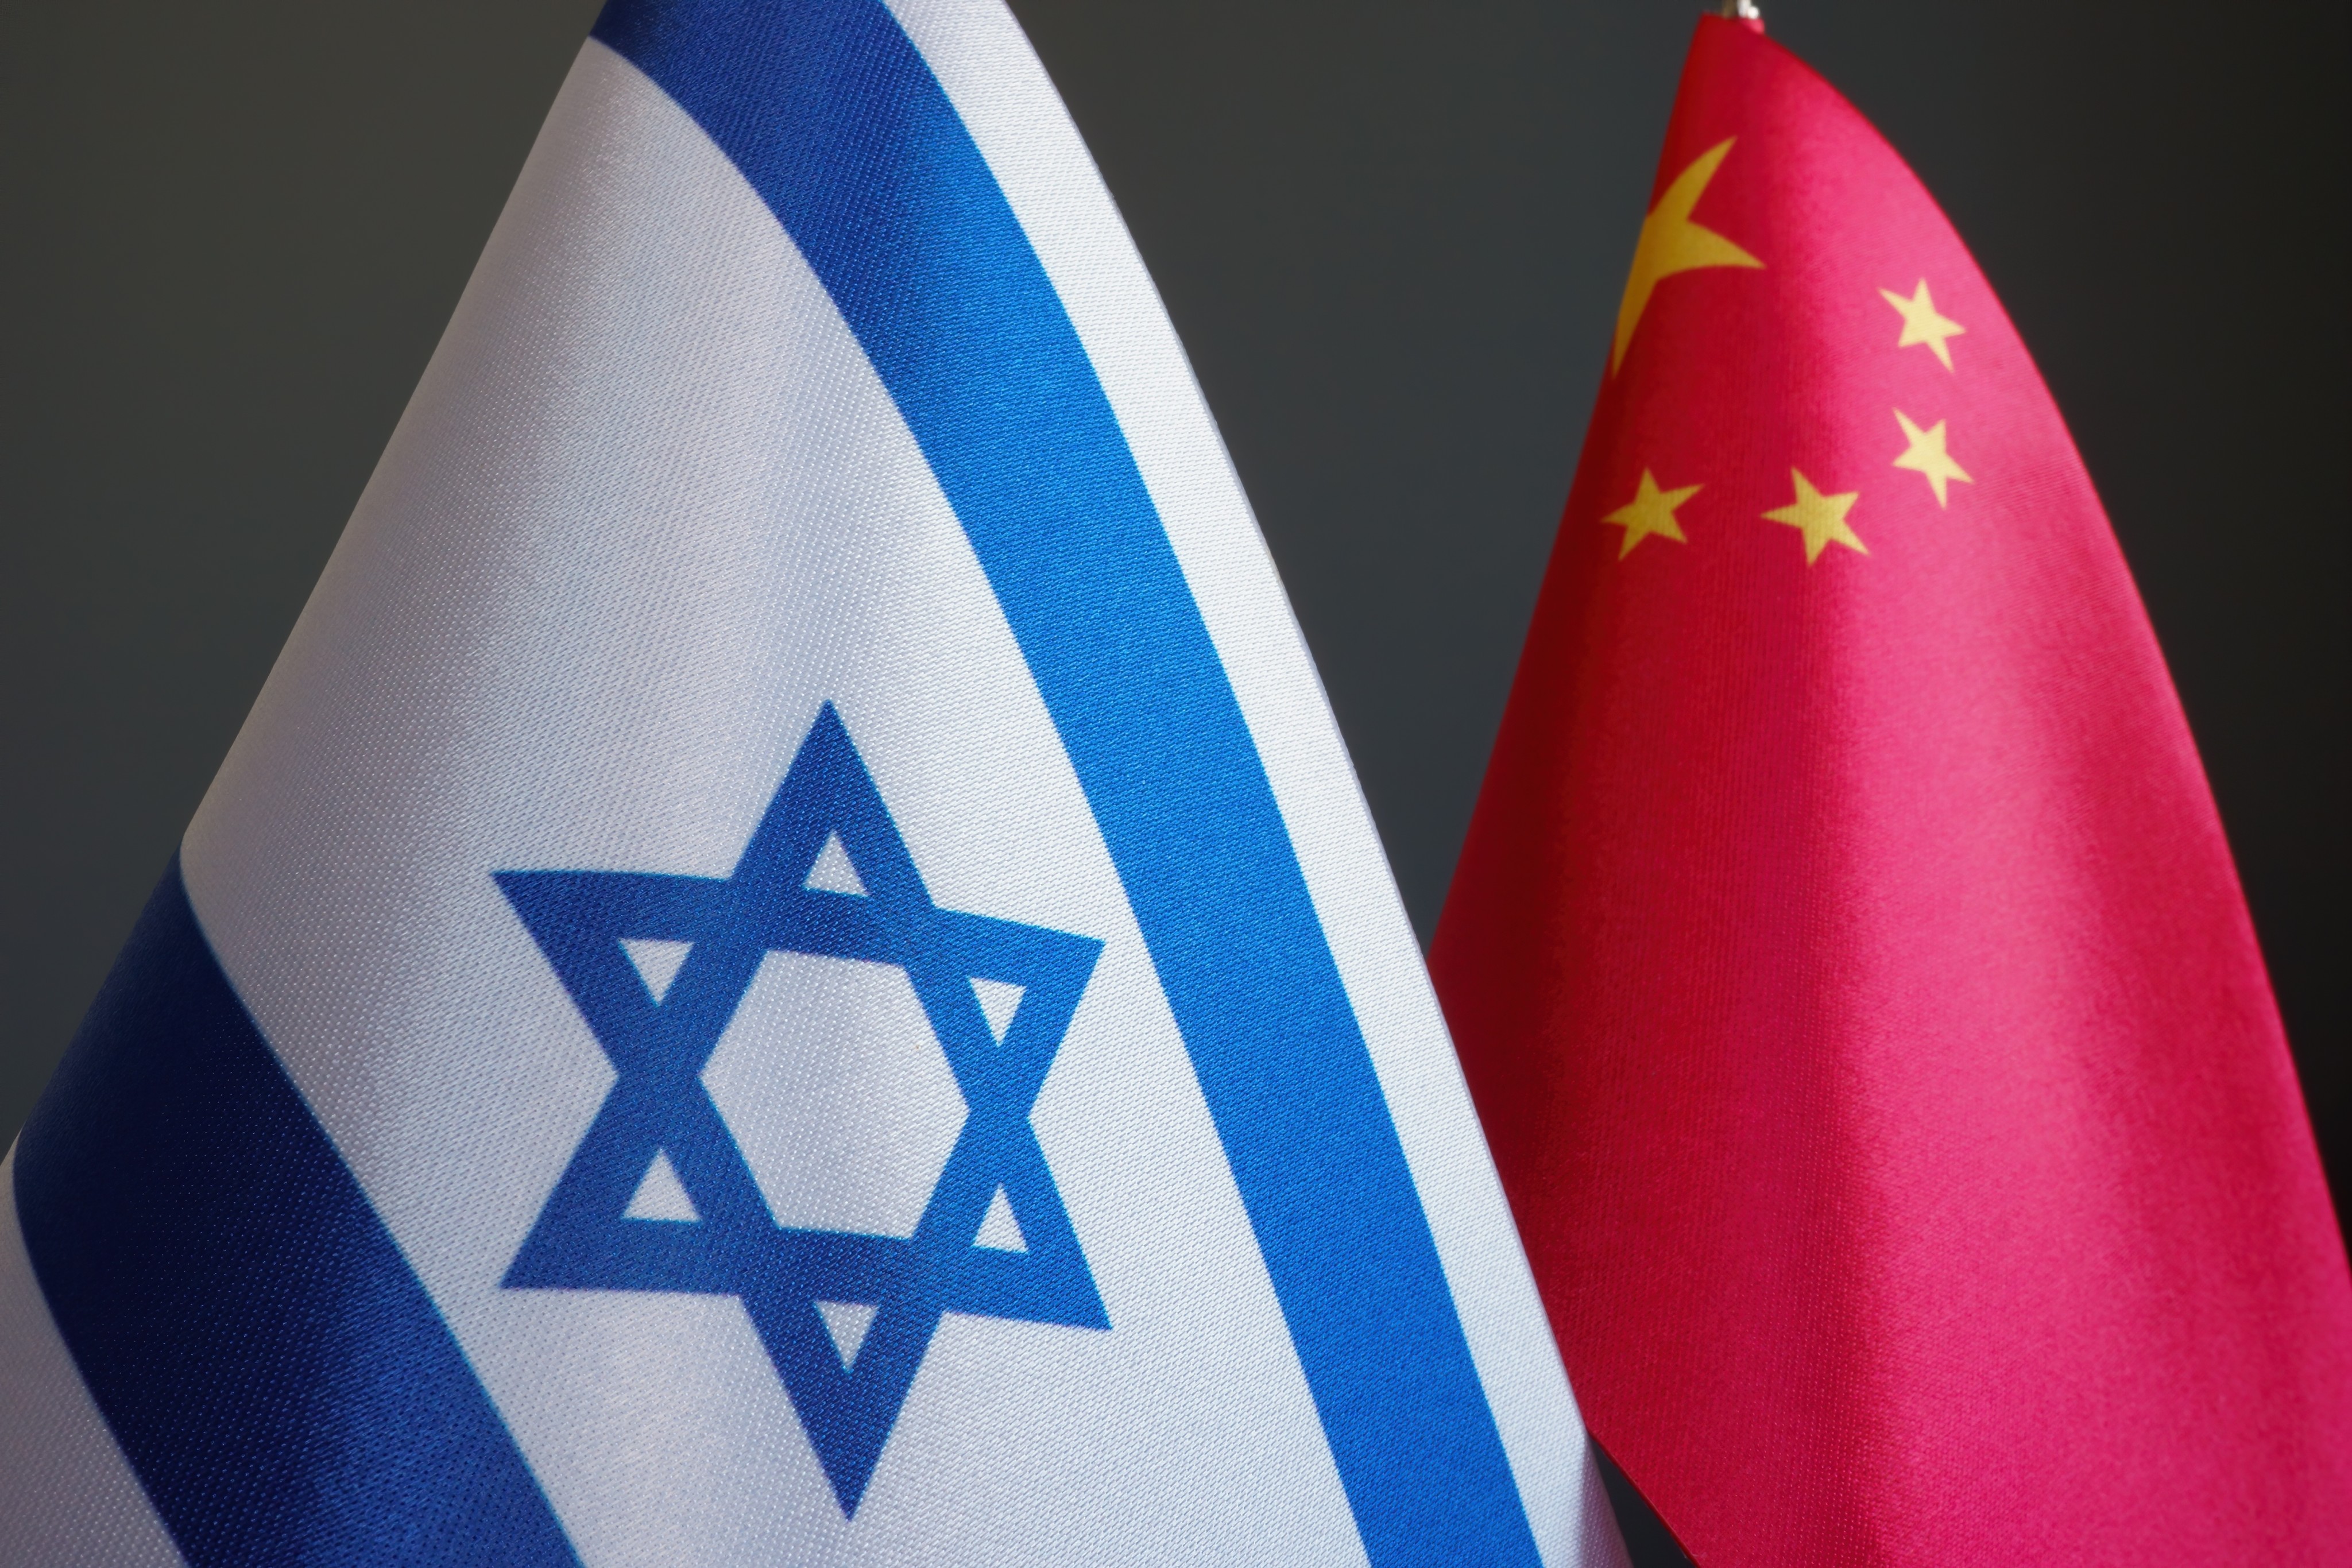 Israel was disappointed by China’s response to the conflict. Photo: Shutterstock